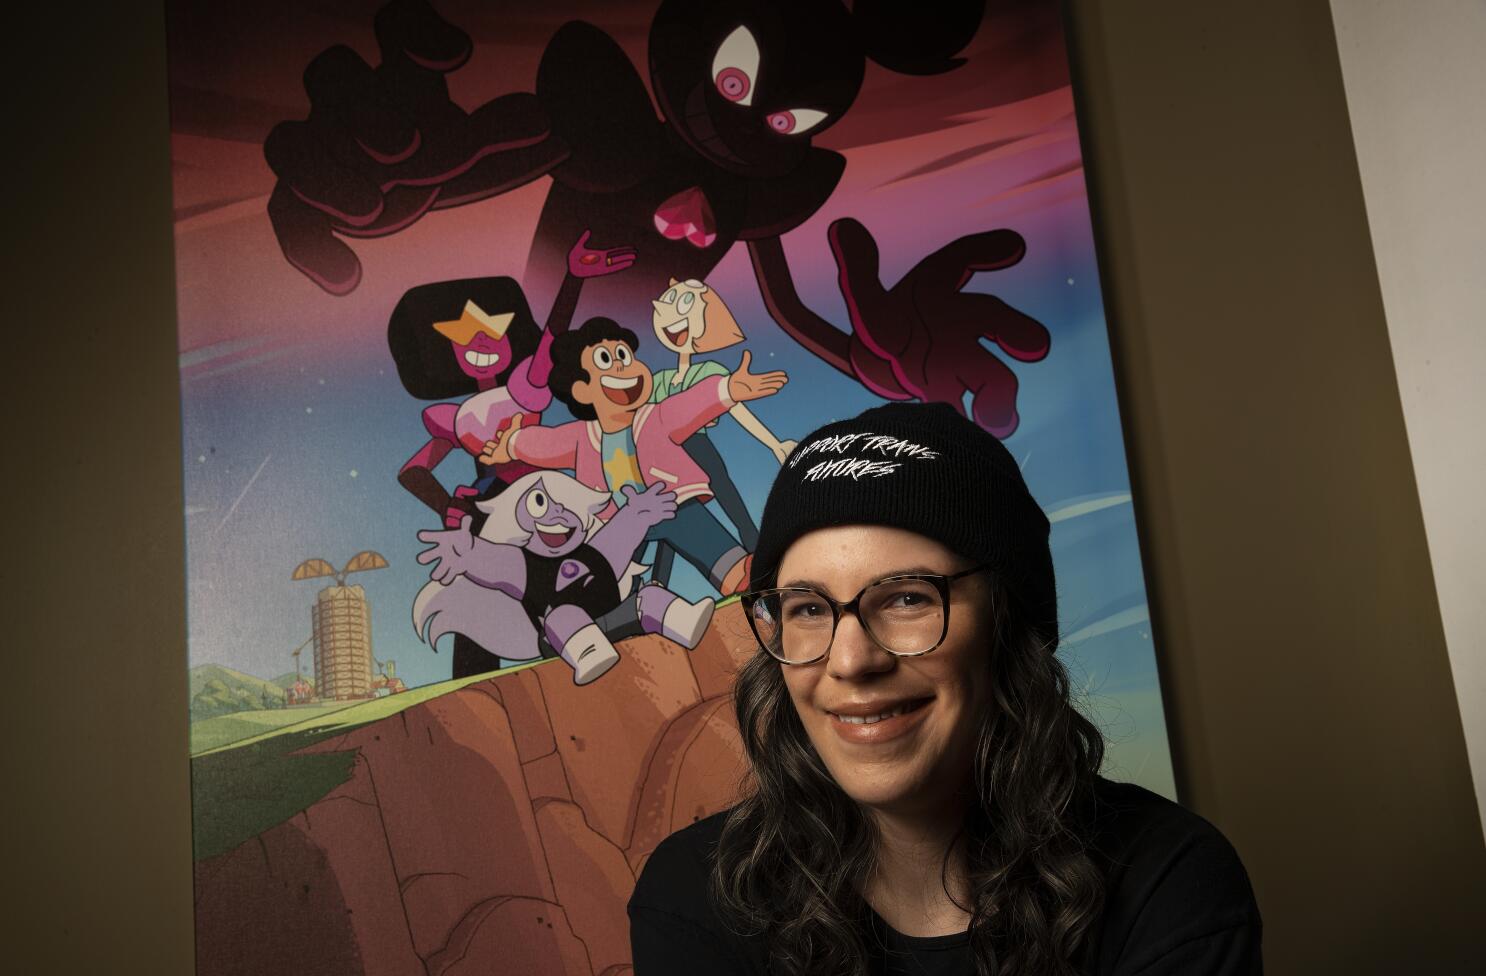 Steven Universe: How Rebecca Sugar changed animation forever